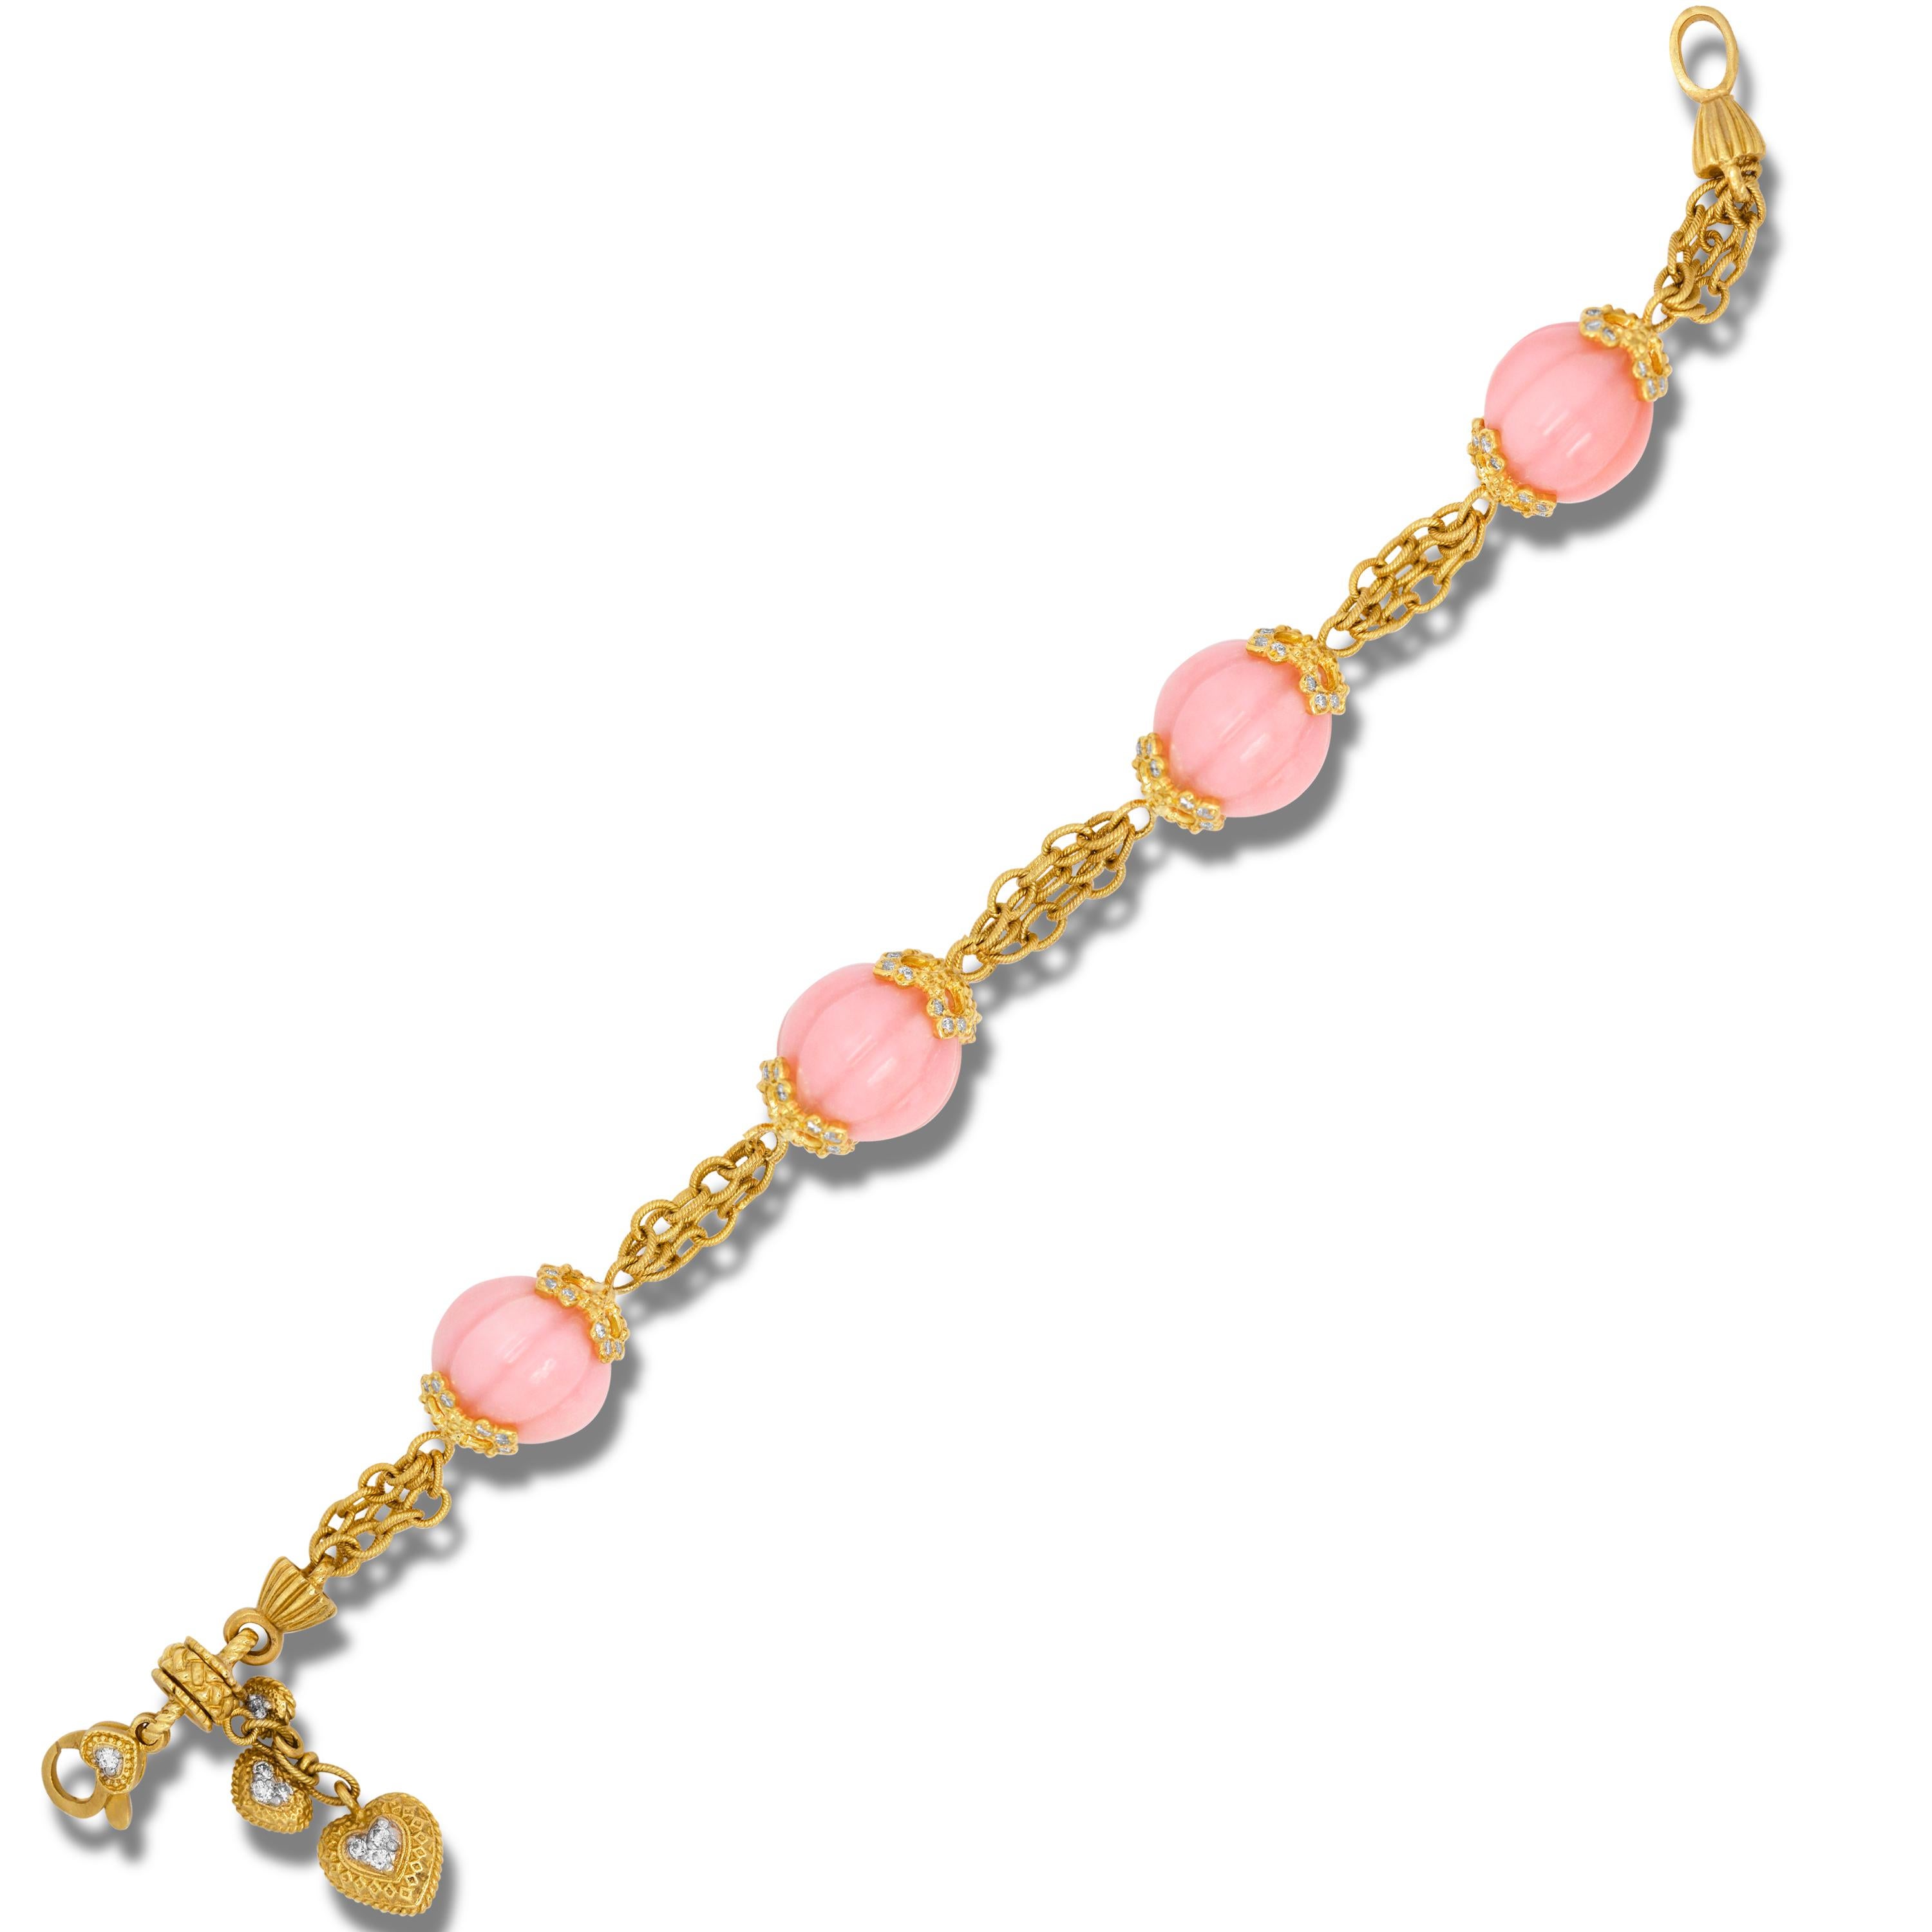 Stambolian Pink Peruvian Opal 18K Yellow Gold Diamond Charm Link Bracelet with Hearts

NO RESERVE PRICE

18K Gold Links make up the bracelet with connections on the Pink opals set with diamonds.

Three dangling diamond and gold hearts lay near the